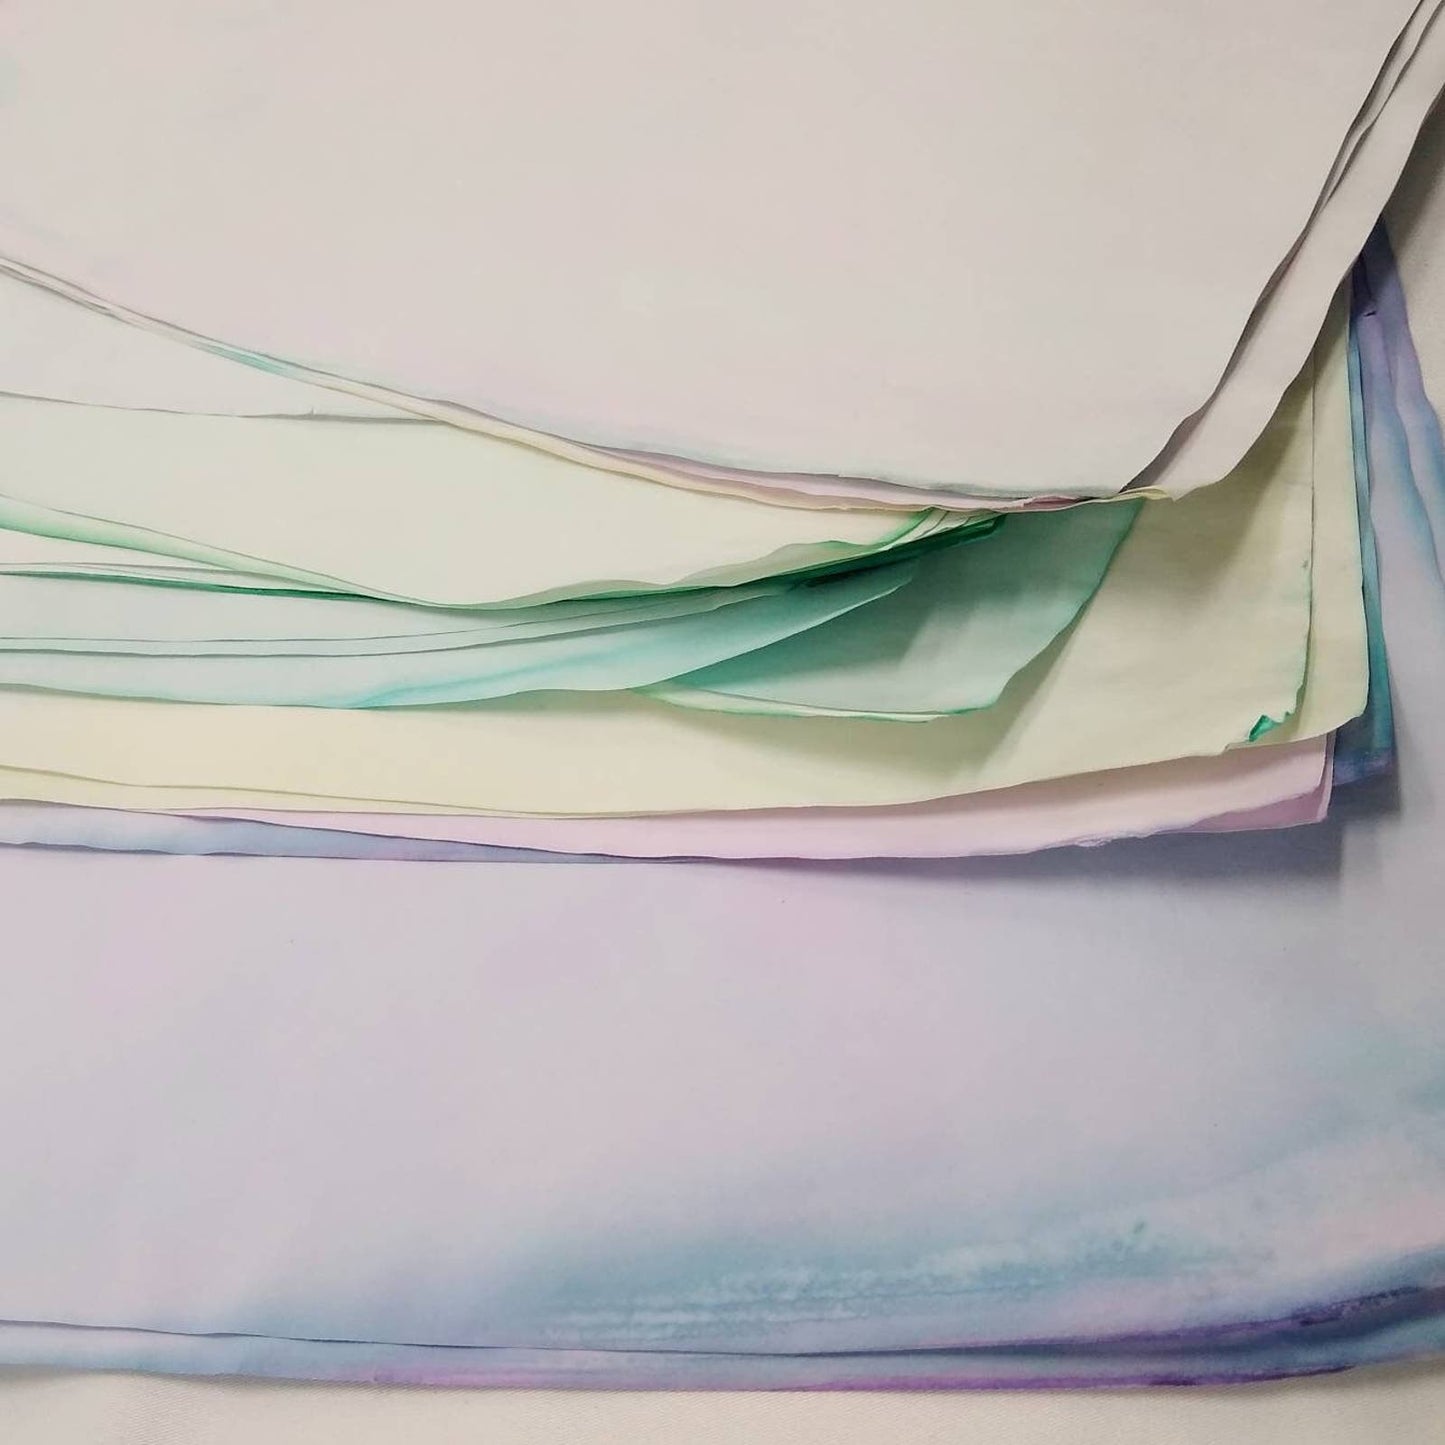 25 Pastel Dyed 8.5"x14" Papers, Purple and Turquoise Papers, Hand Dyed Papers